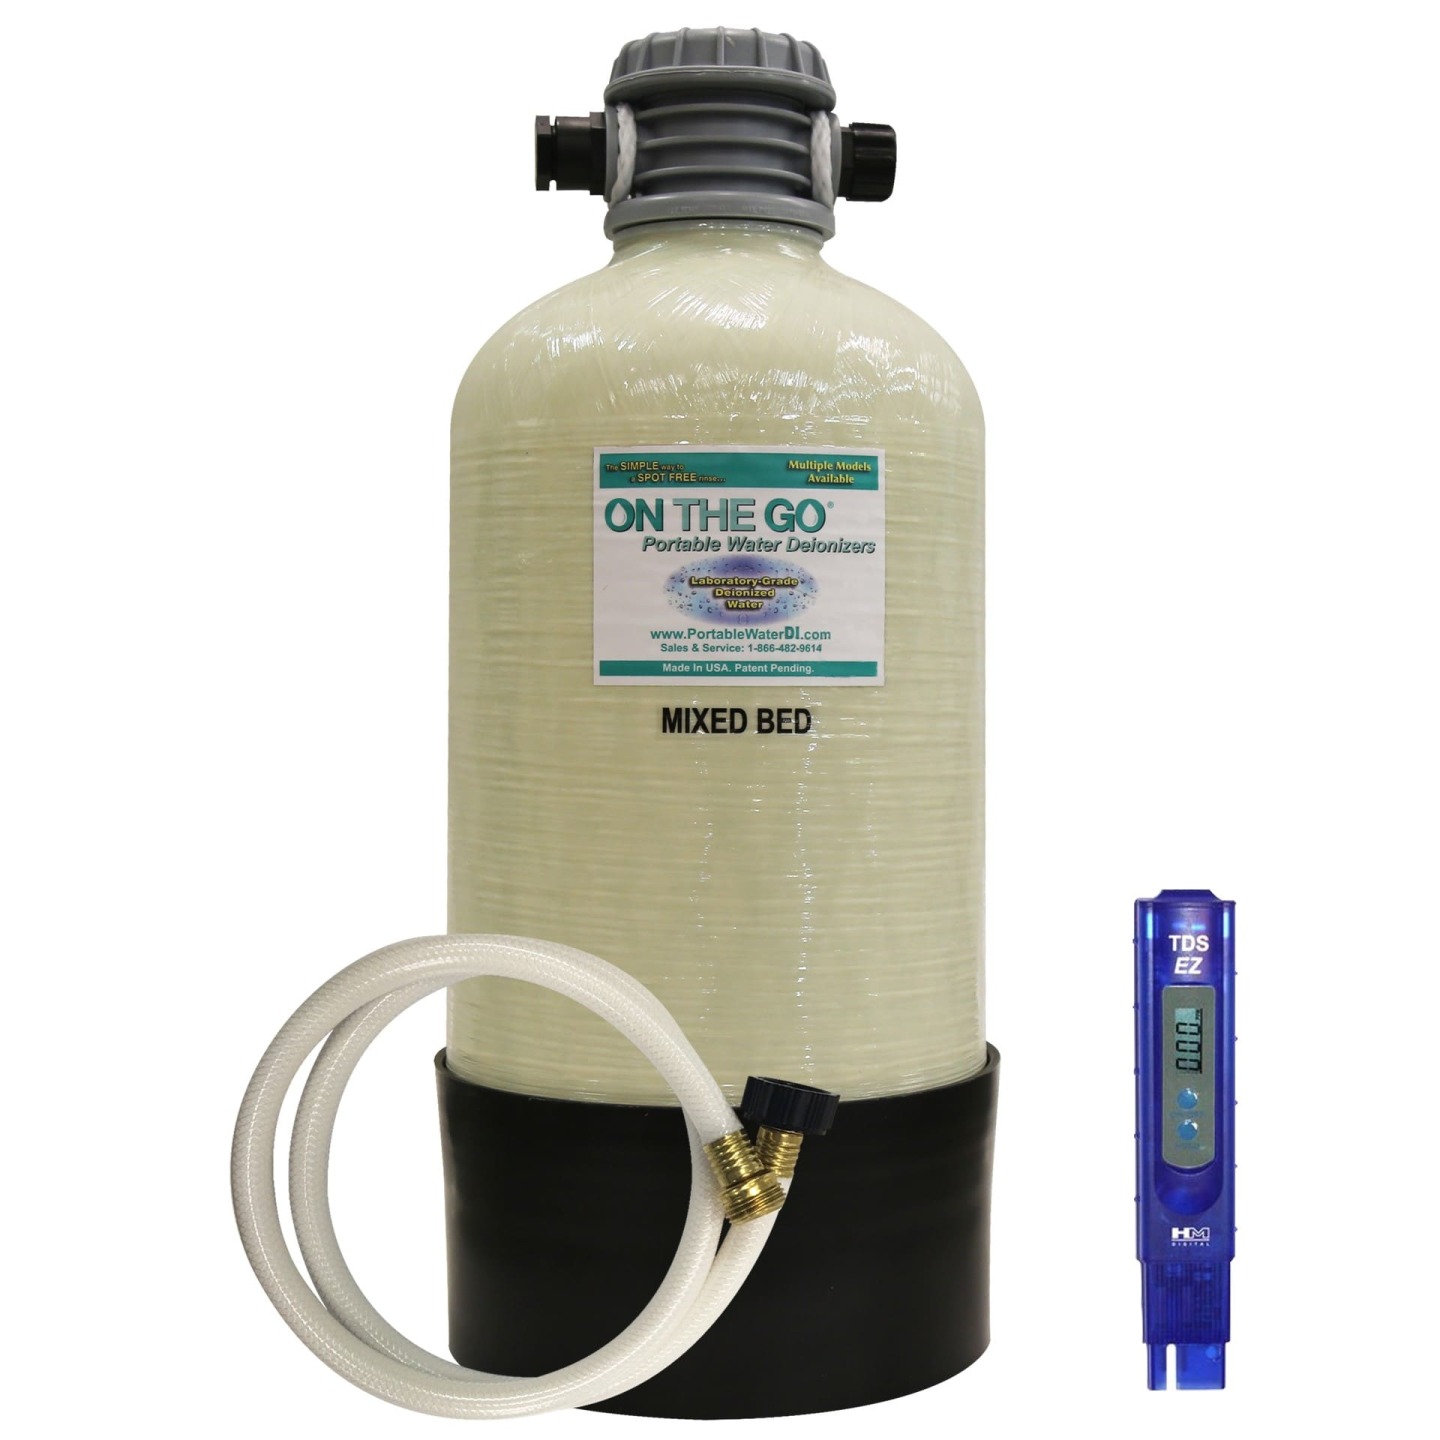 Mixed Bed Deionizer Standard Model - On The Go - Portable Water DI